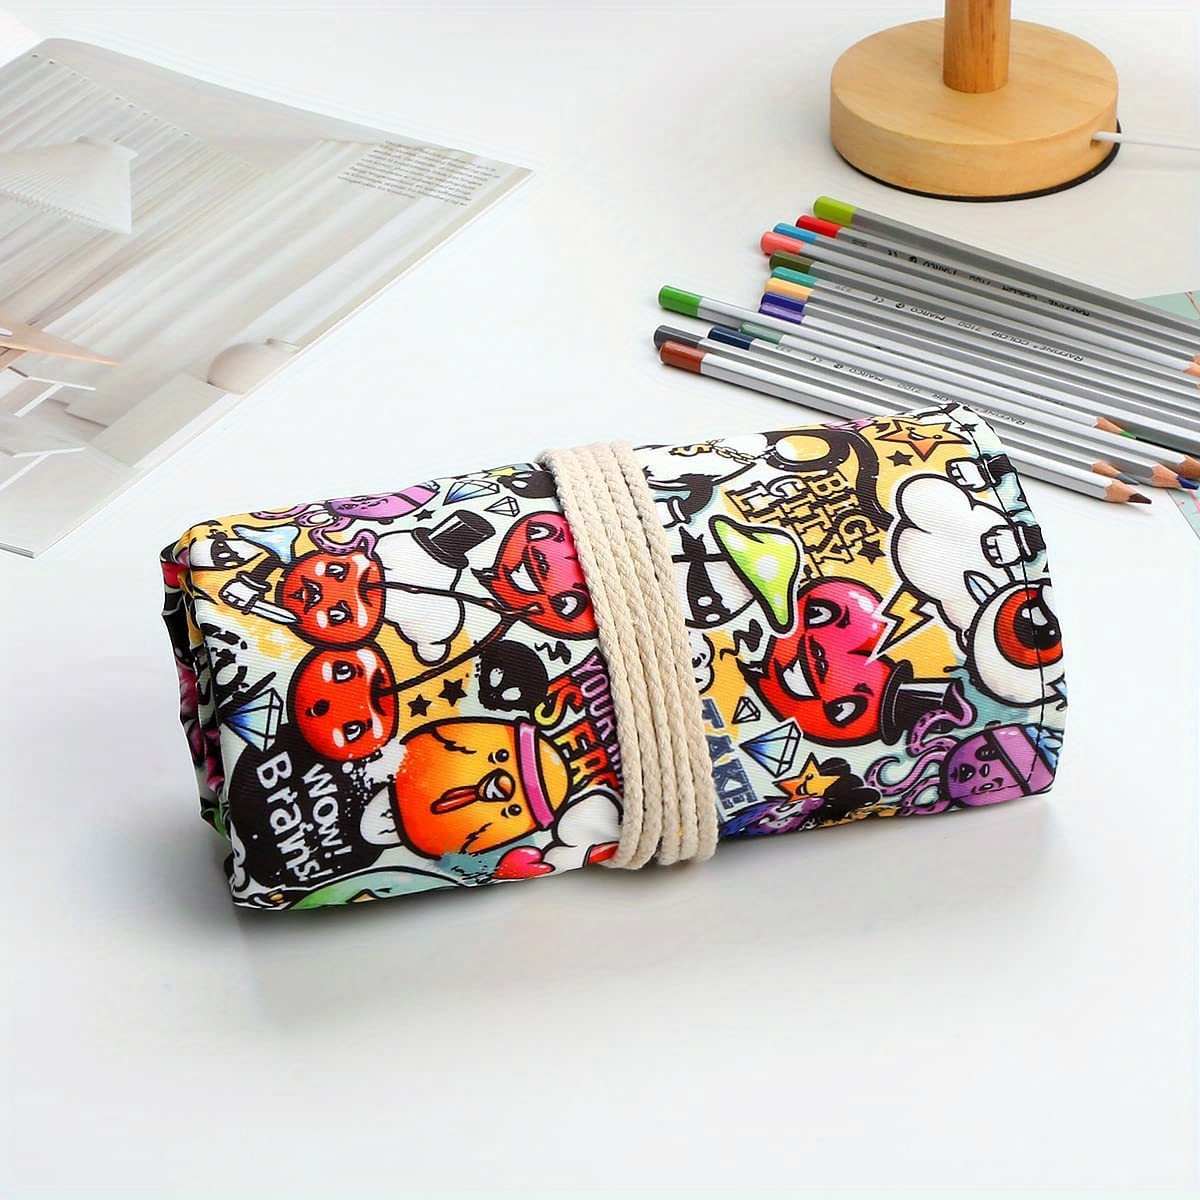 Canvas Pencil Wrap,72 Pencil Holder Colored Pencils Case Roll Multi-purpose  Pouch for School Office Art. Soft Pencil Bag for Travel Makes Your Pencils  Organized